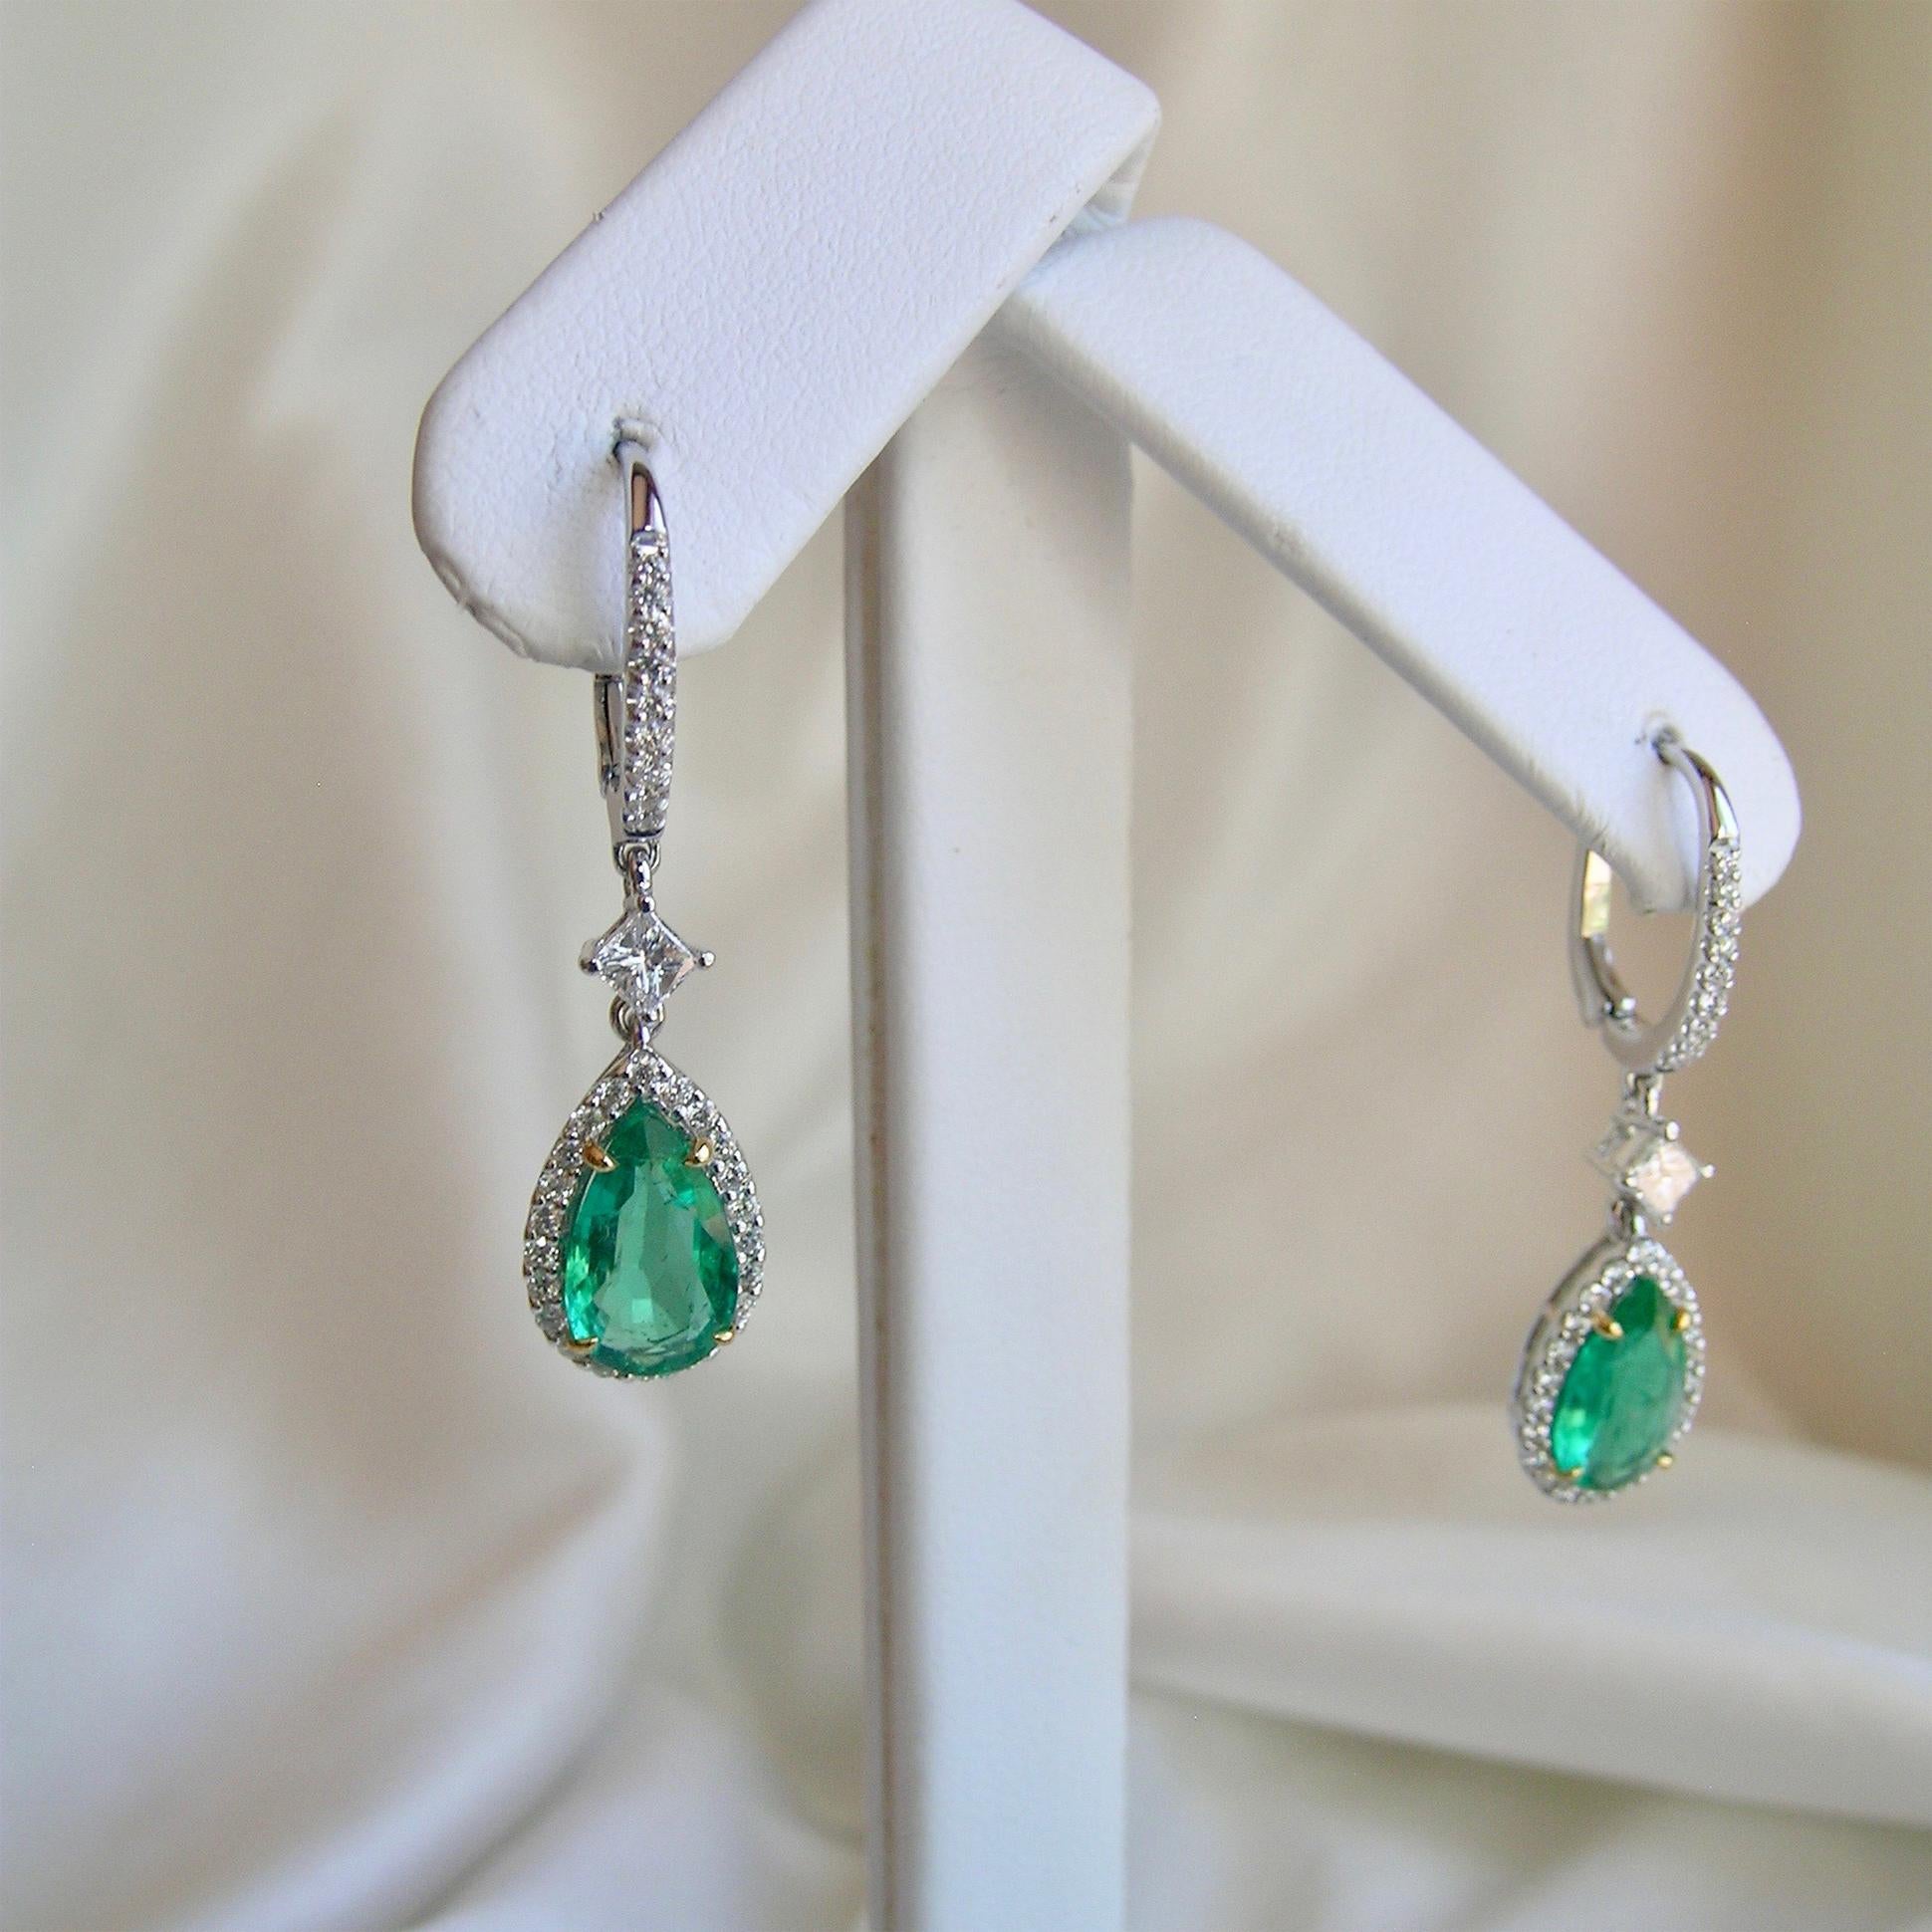 Beautiful!  2.74cts of clean, Zambian Emeralds & 0.46cts Diamonds are set into these elegant earrings.  Clean Emeralds are usually very expensive, these are a Covid 19 special price.  Easily worn to any event, day or night.
Wearable luxury is the